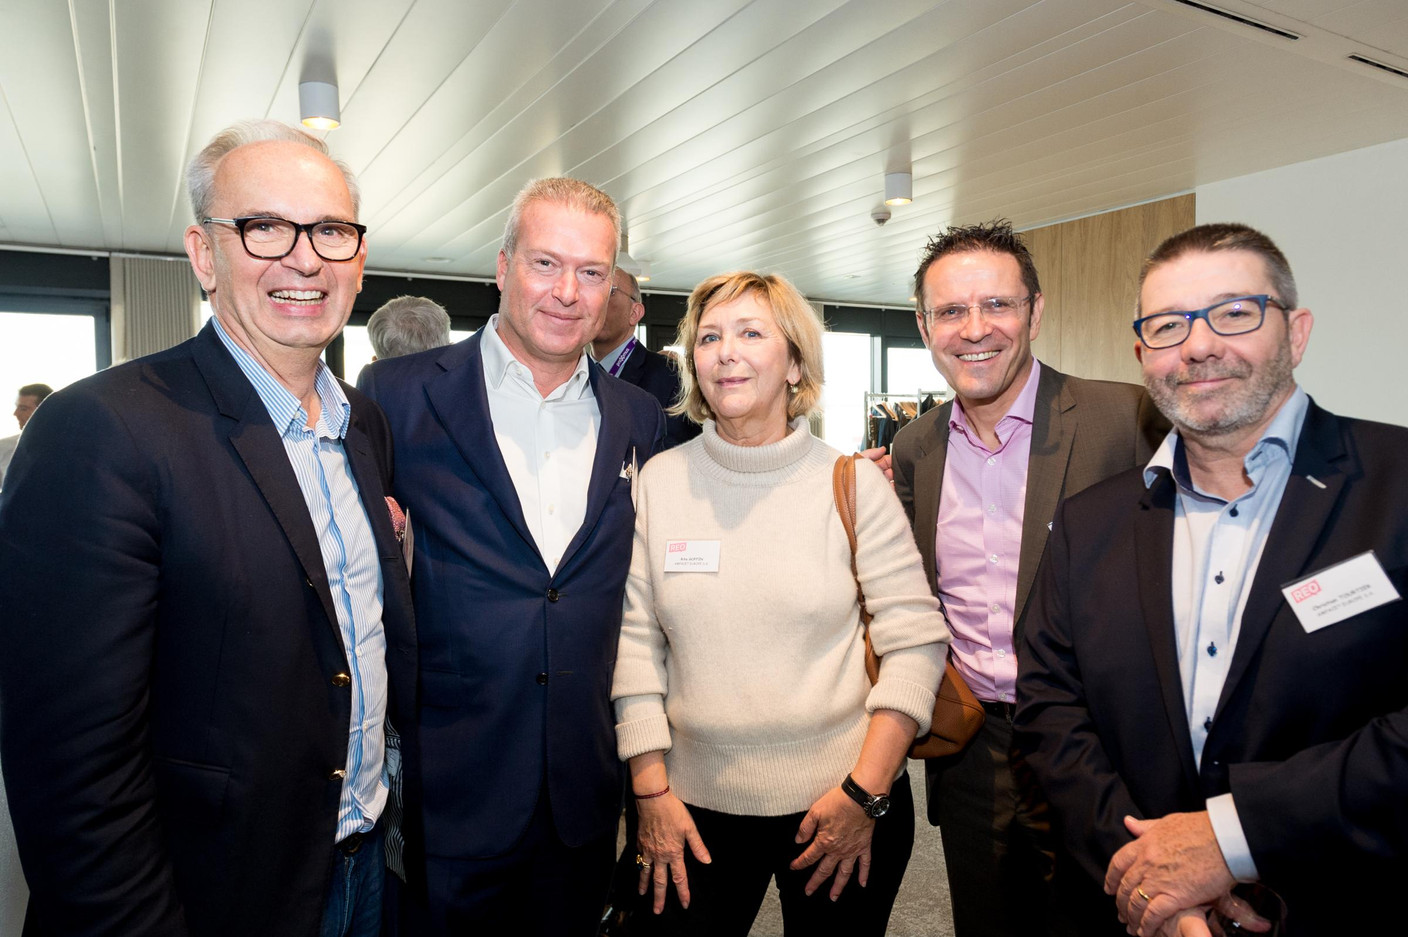 Thierry Smets (Smets), Olivier Coppieters (Resultance), Rita Goffin (Ampacet Europe), Yves Lahaye (RBC) et Christian Tourtier (Ampacet Europe) (Photo: Marie De Decker)